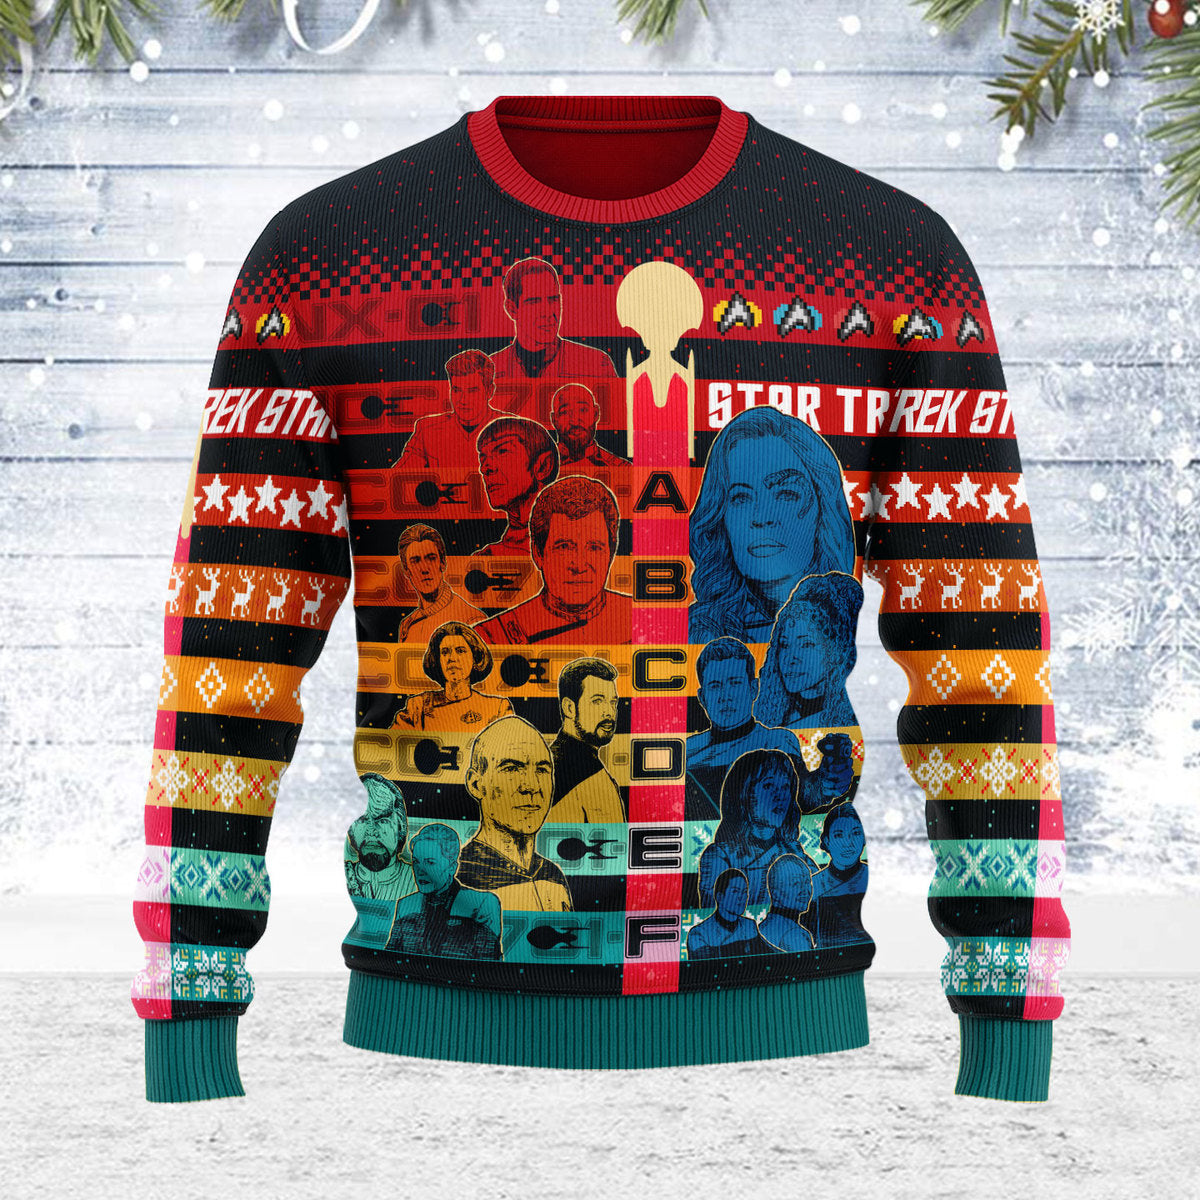 Star Trek Name Mean Almost Everything Christmas - Sweater - Ugly Christmas Sweater